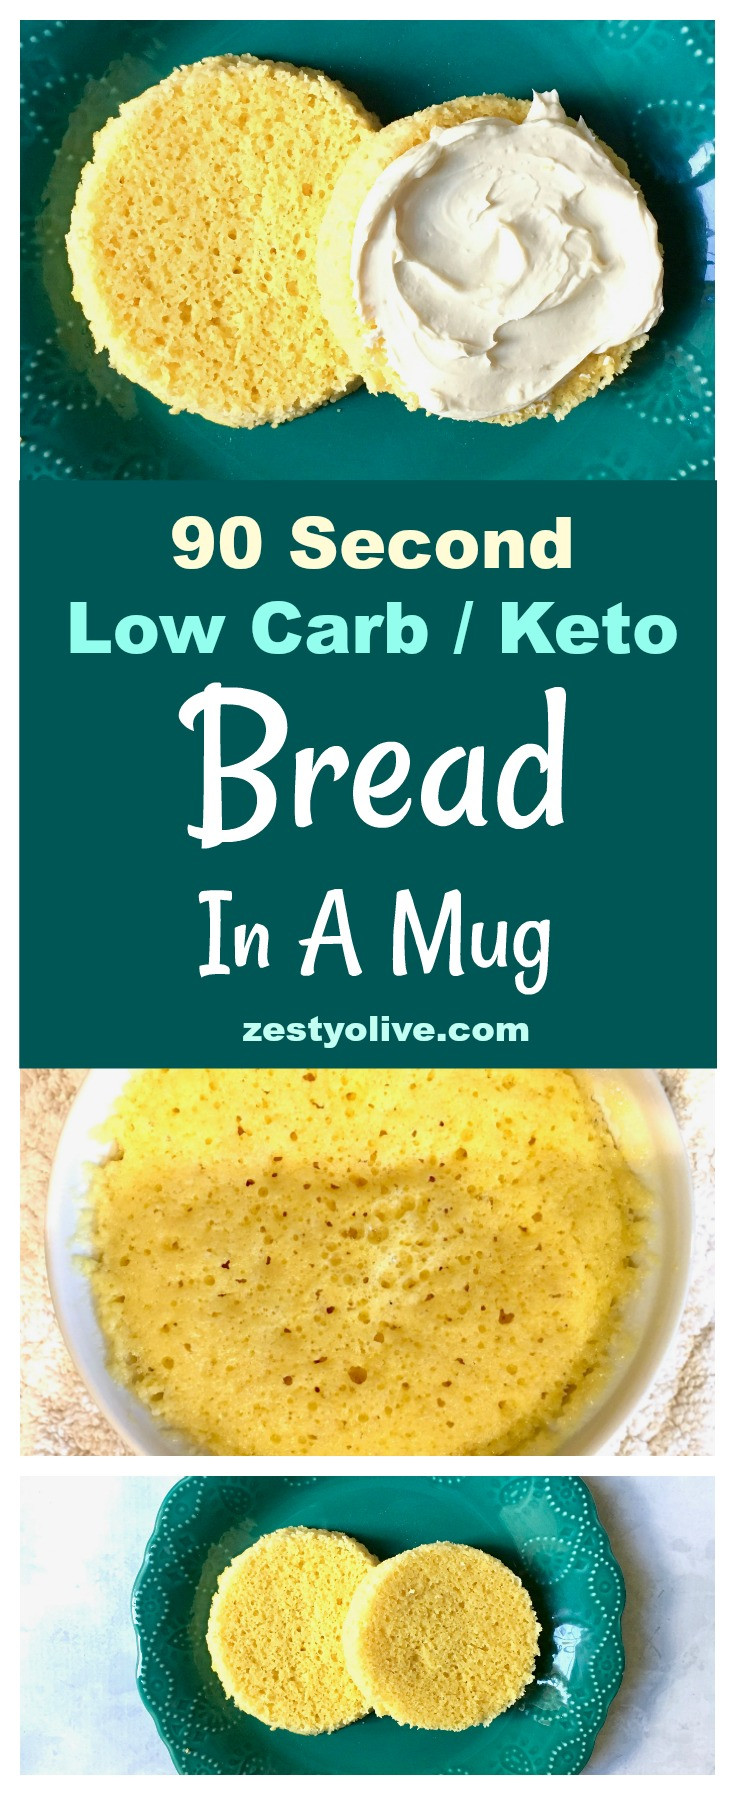 Low Carb Bread In A Mug
 How To Make 90 Second Keto Low Carb Bread In A Mug Zesty